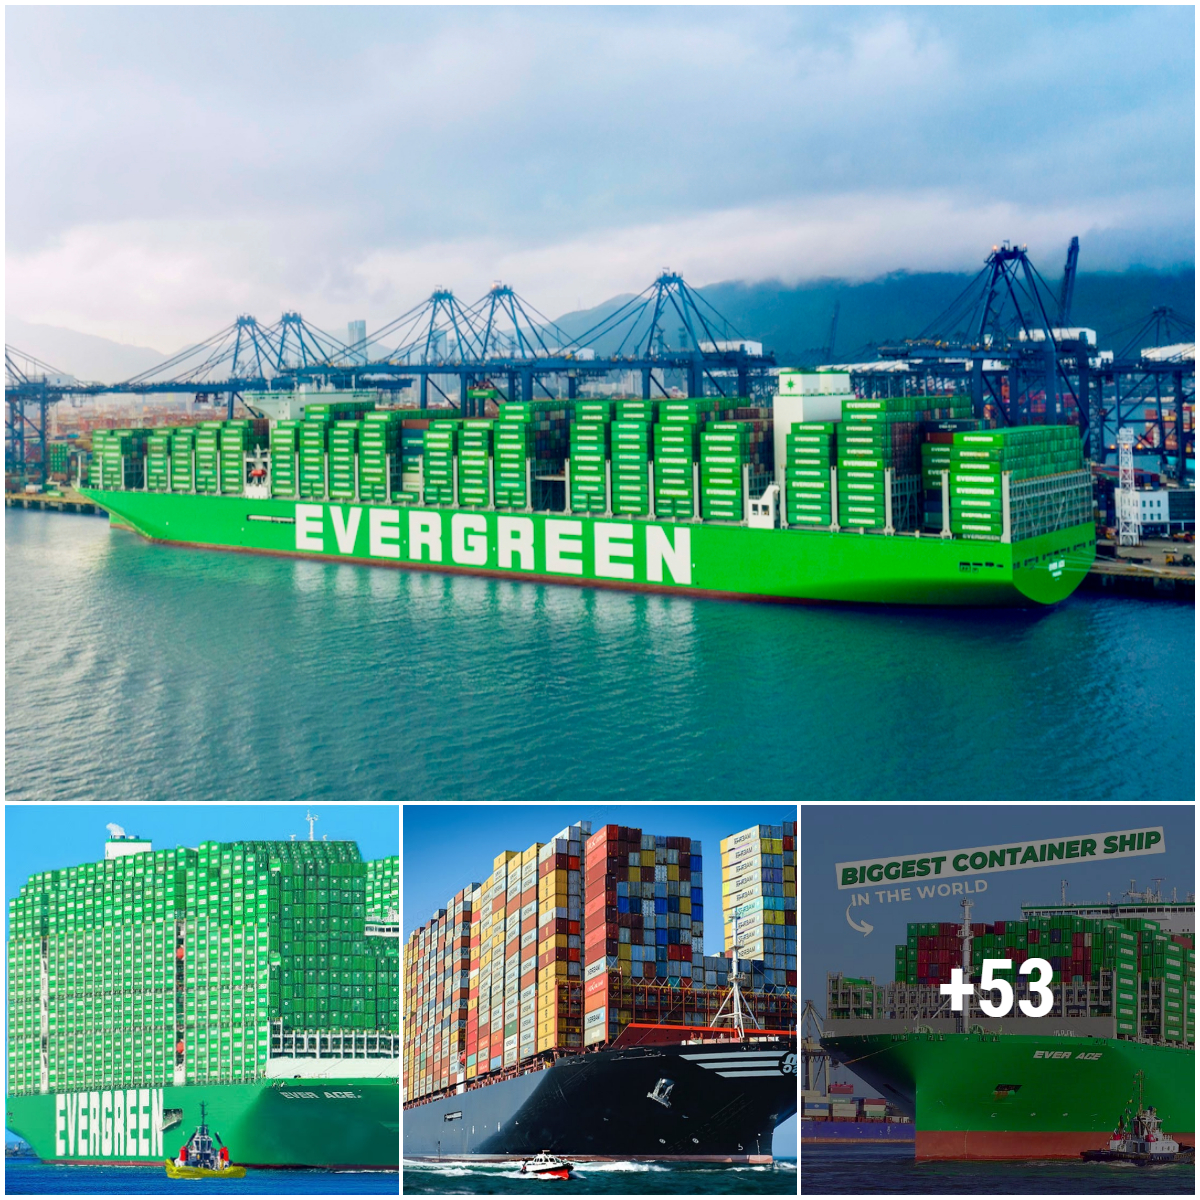 Explore the insides and engineering wonders of the largest container ship ever built in history